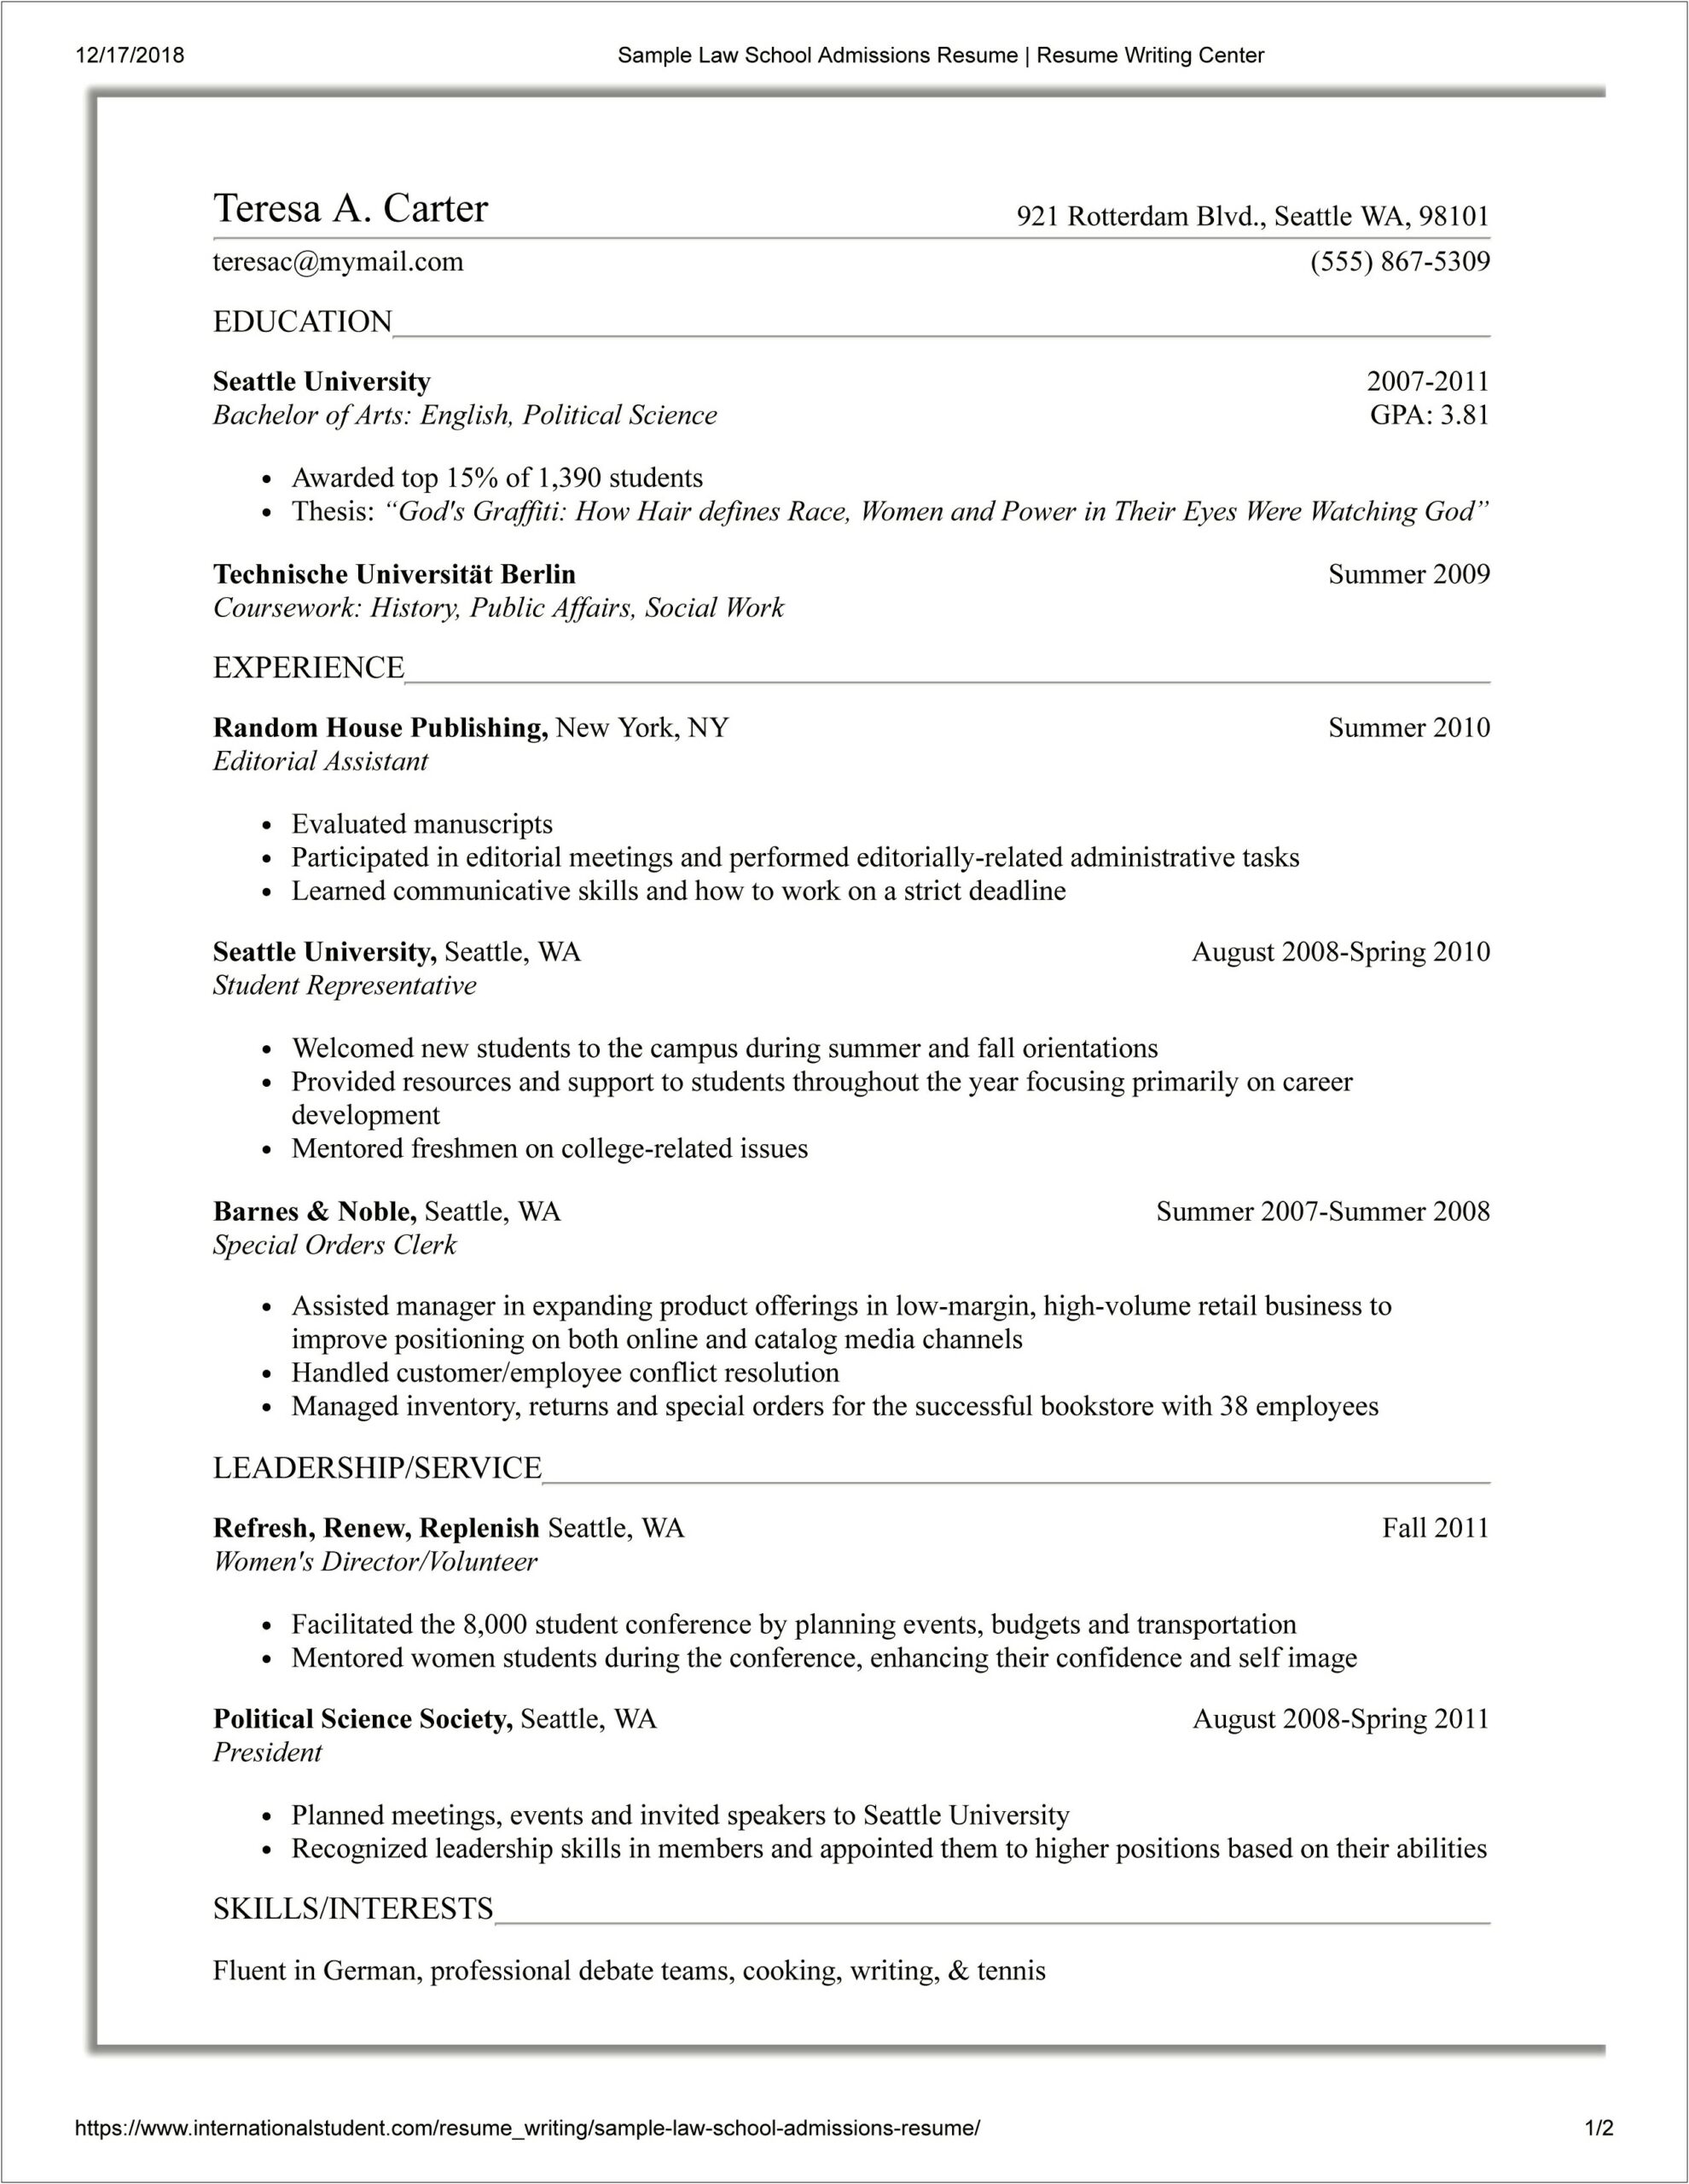 Resume Word Layout Legal Or Letter